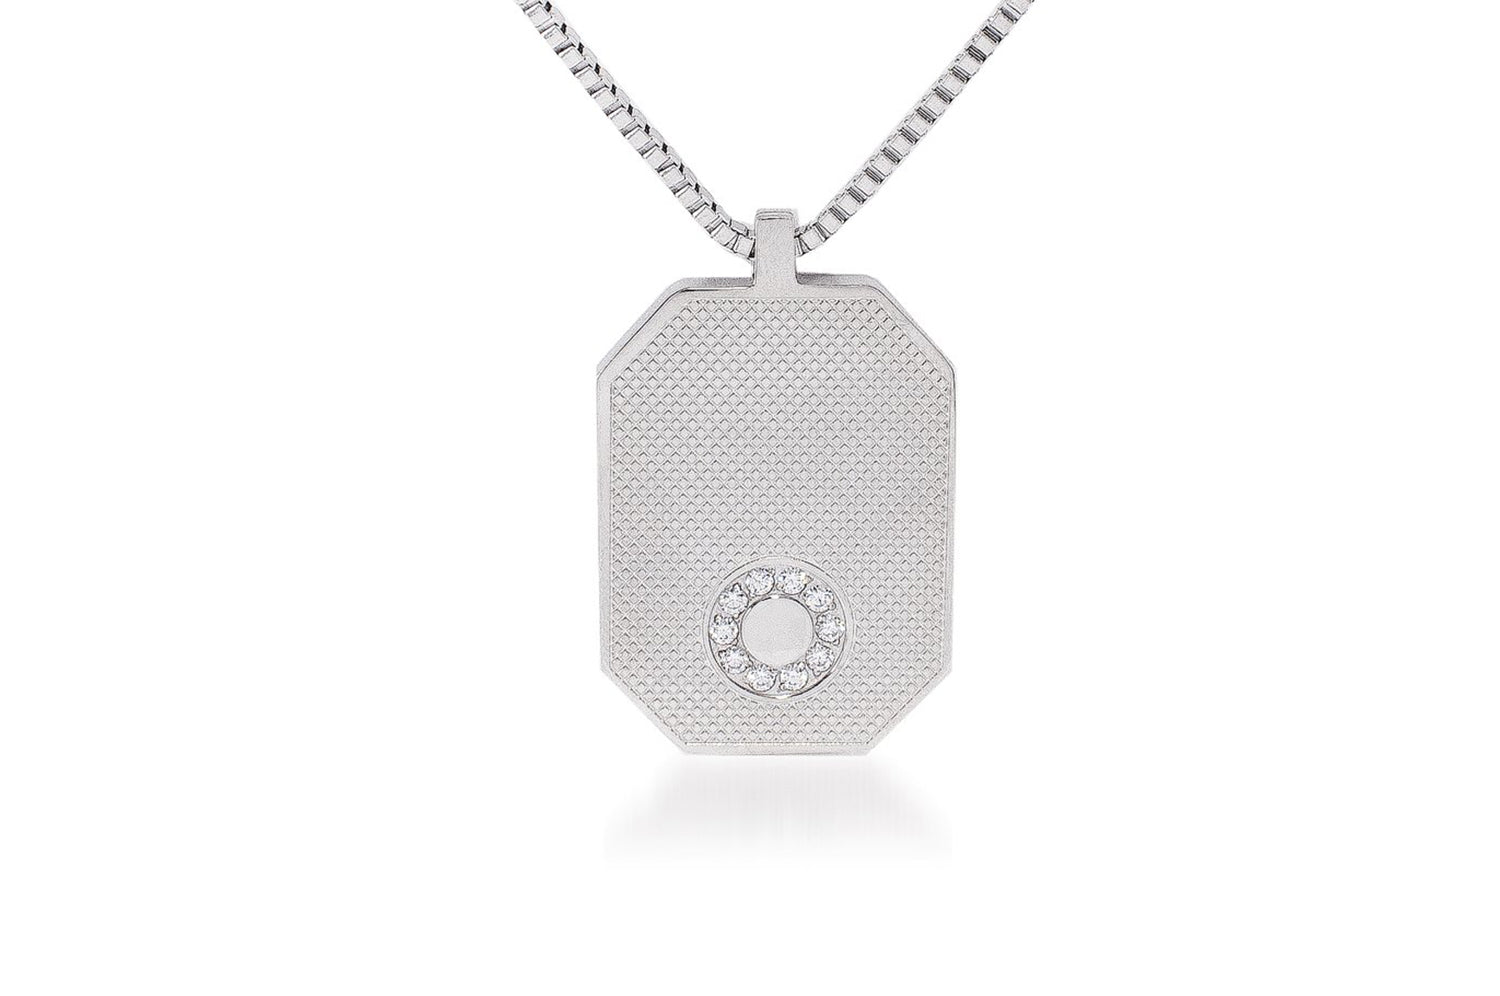 Meblo Stainless Steel Necklace